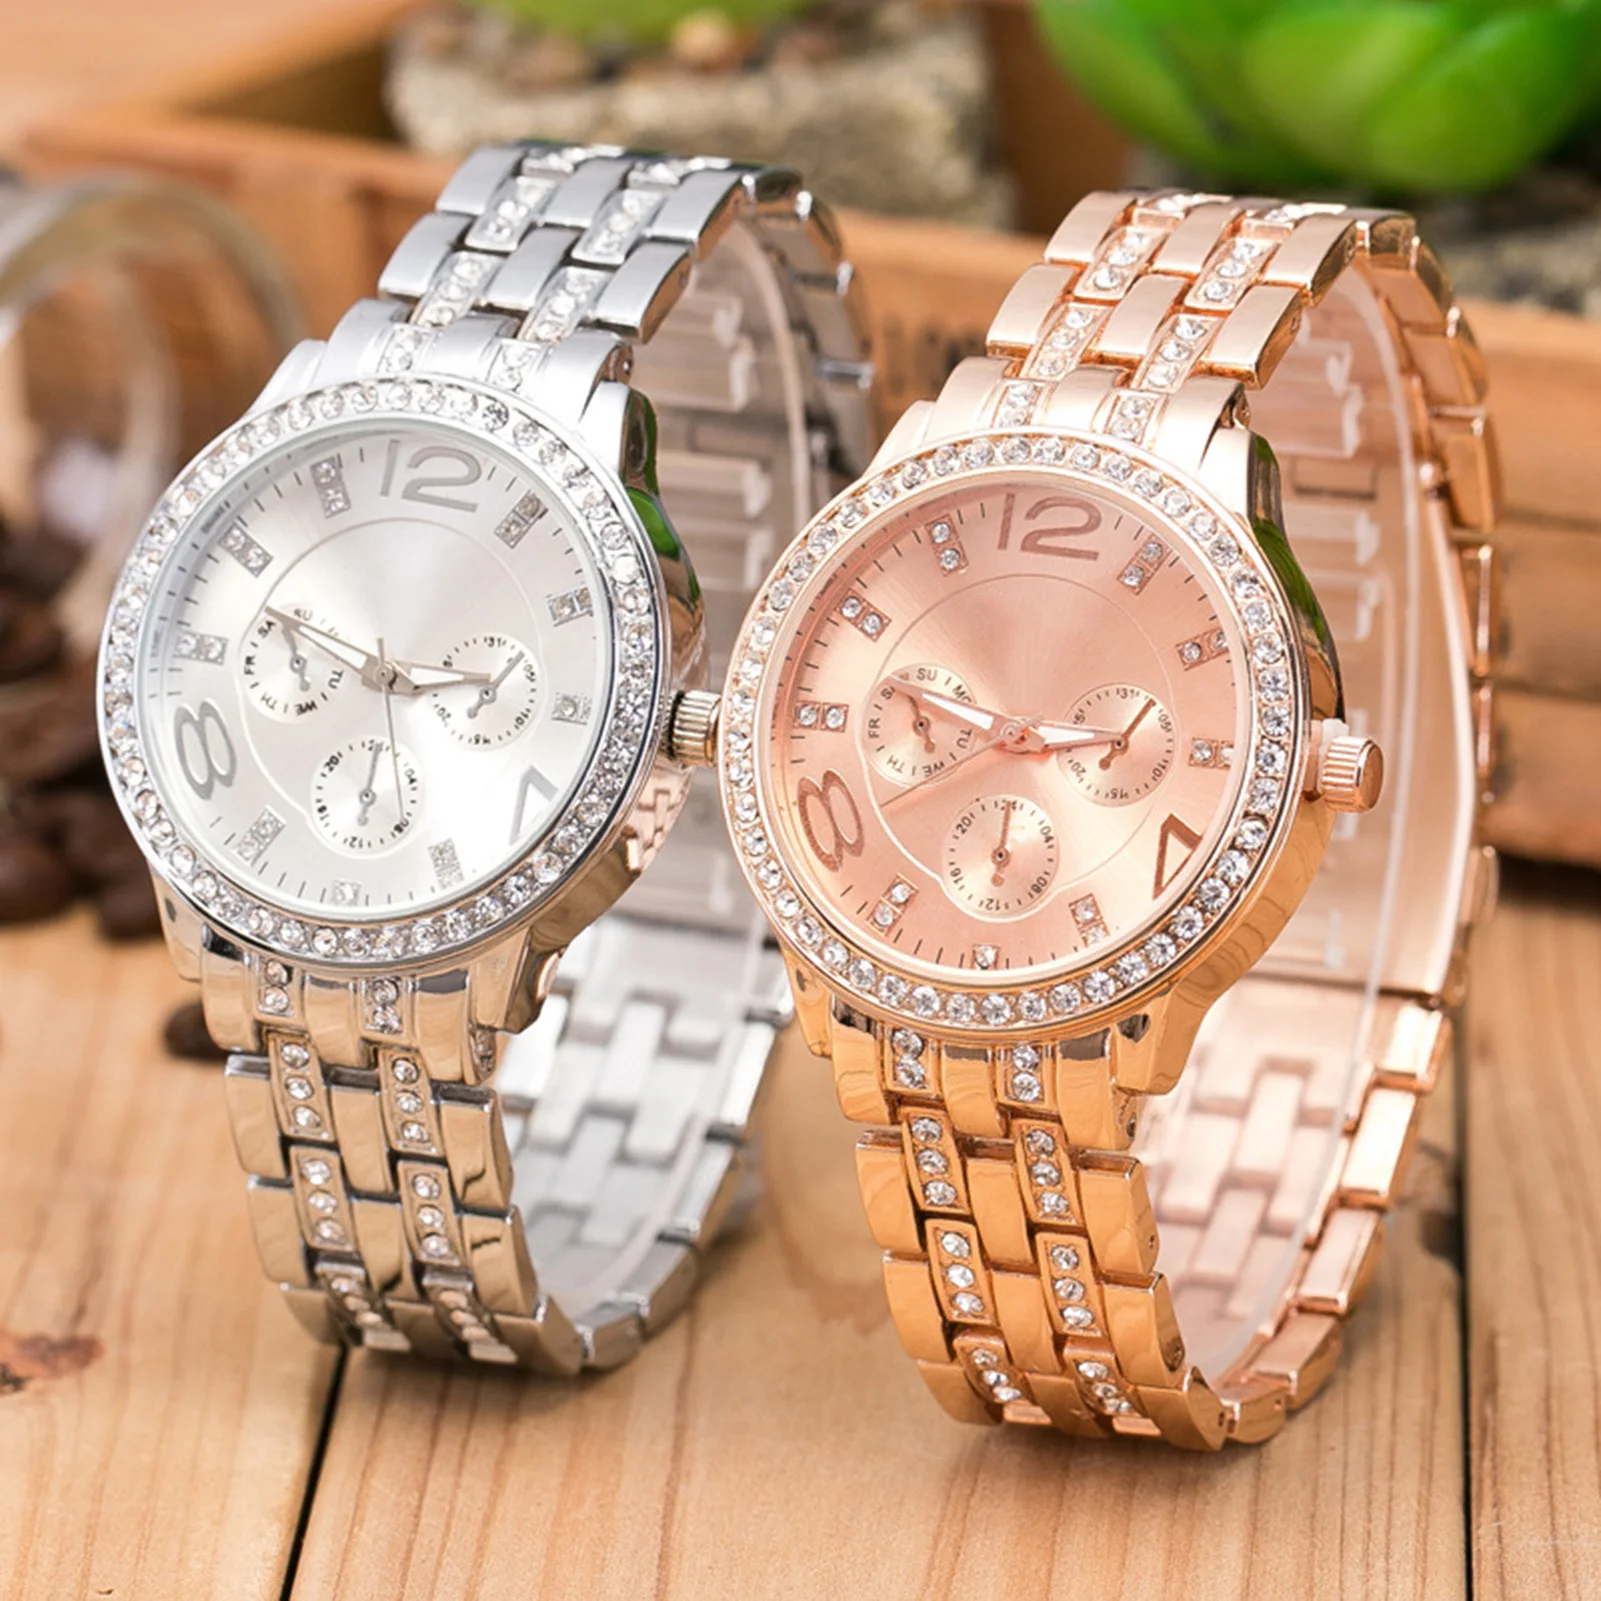 

Couple Fashion Quartz Watch Easy to Read Dial Glitter Crystal Bracelet Analog Watch for Girlfriend Birthday Gift H9